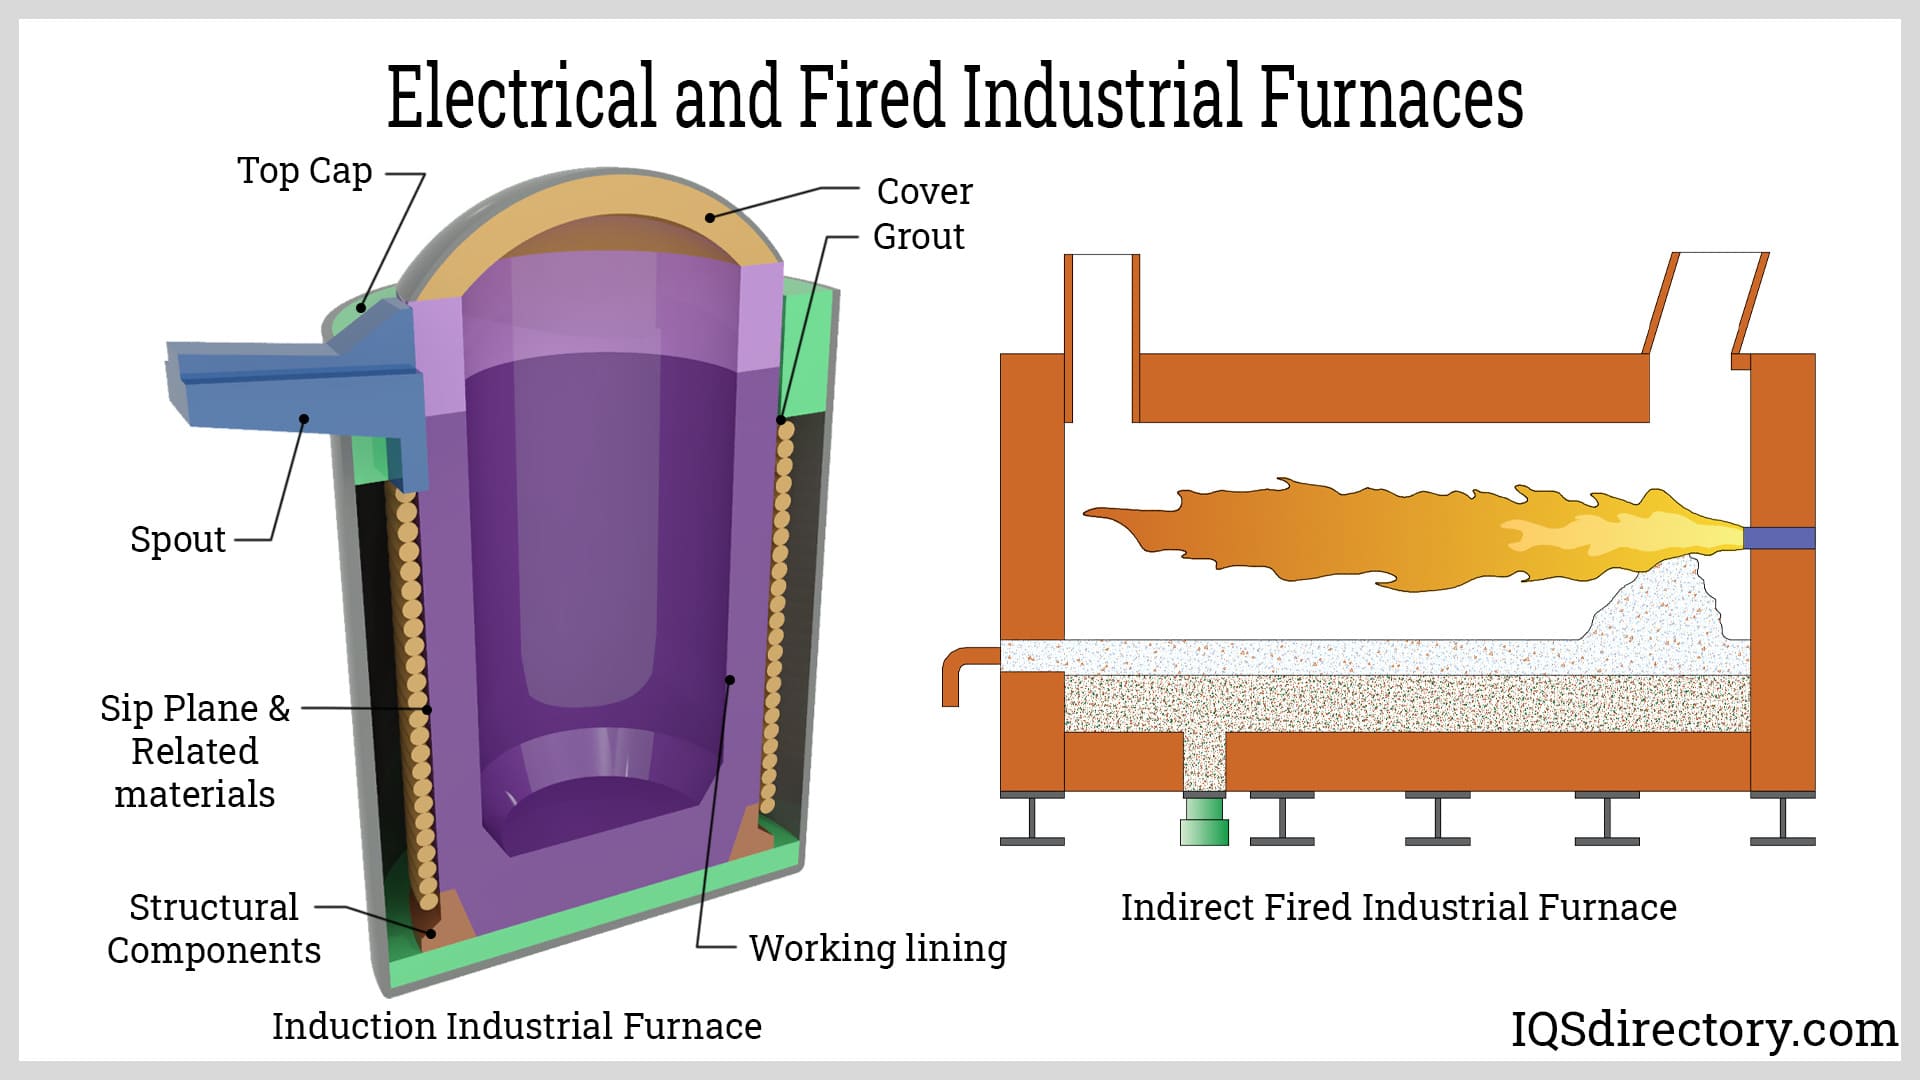 3 Furnace Fire Causes and How to Prevent Them - Around the Clock